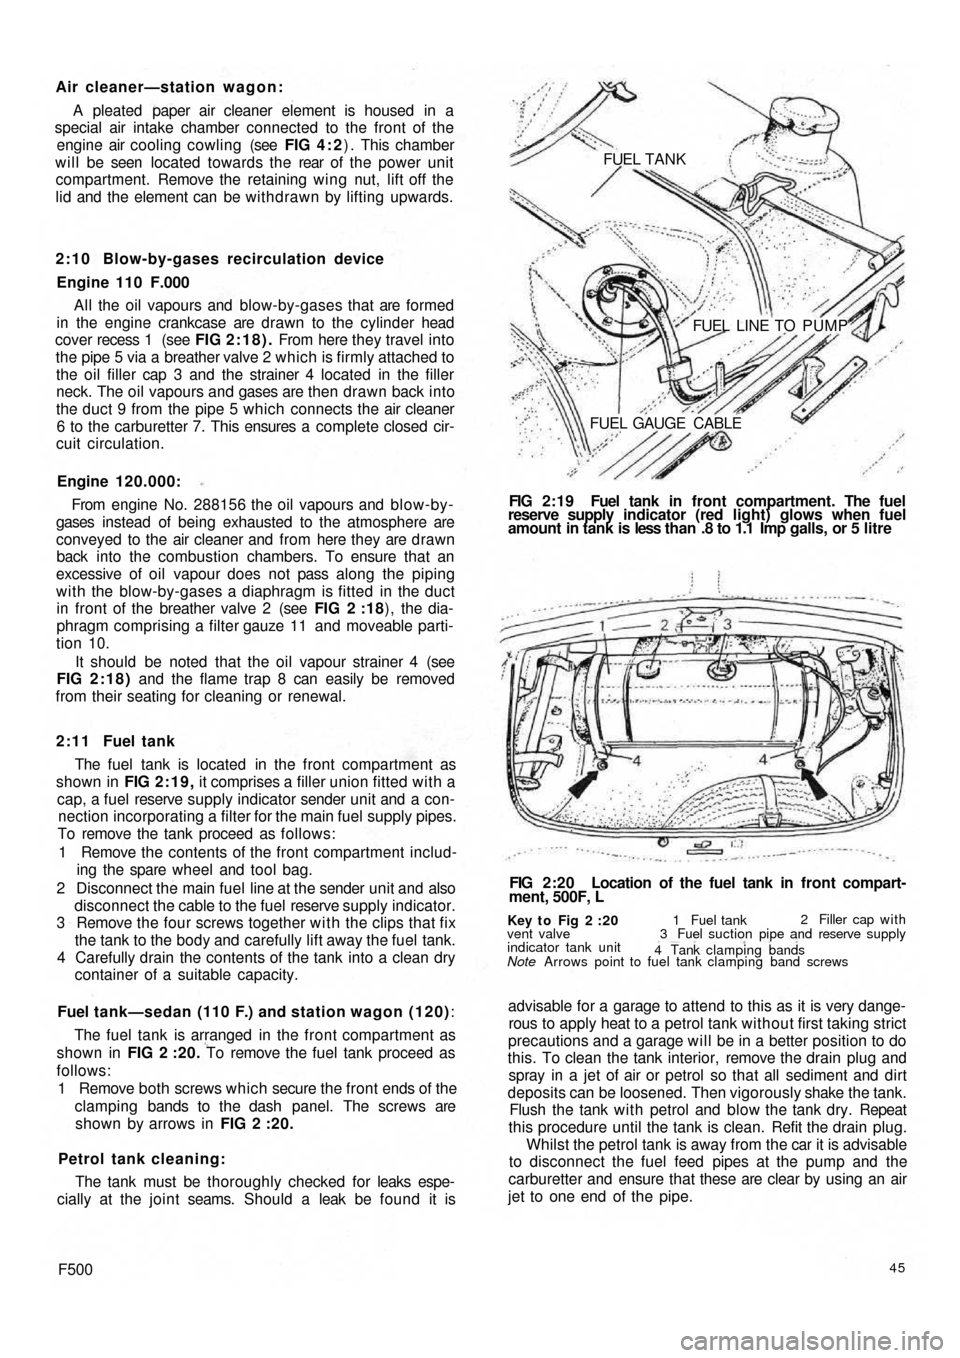 FIAT 500 1971 1.G Workshop Manual Air cleaner—station wagon:
A pleated paper air cleaner element is housed  in a
special air intake chamber connected to the front of the
engine air cooling cowling (see FIG 4 : 2) . This chamber
will